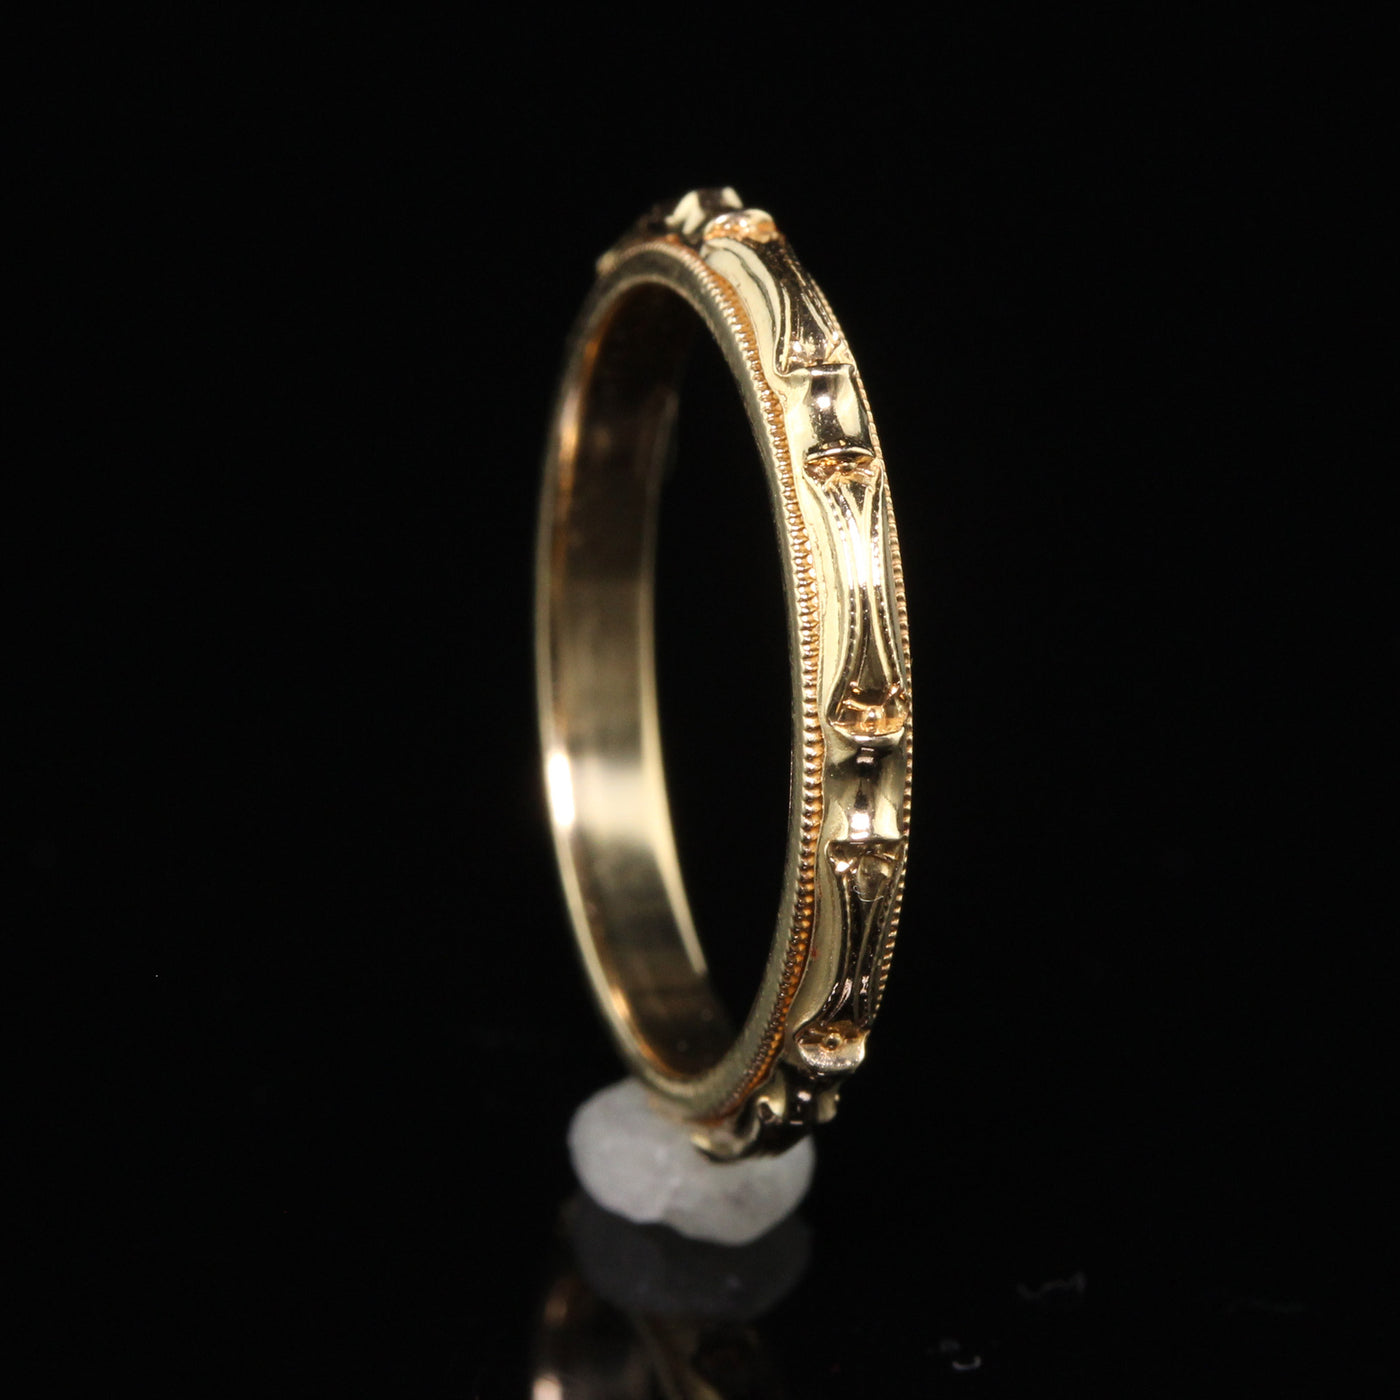 Antique Art Deco Art Carved 14K Yellow Gold Engraved Wedding Band - Size 5